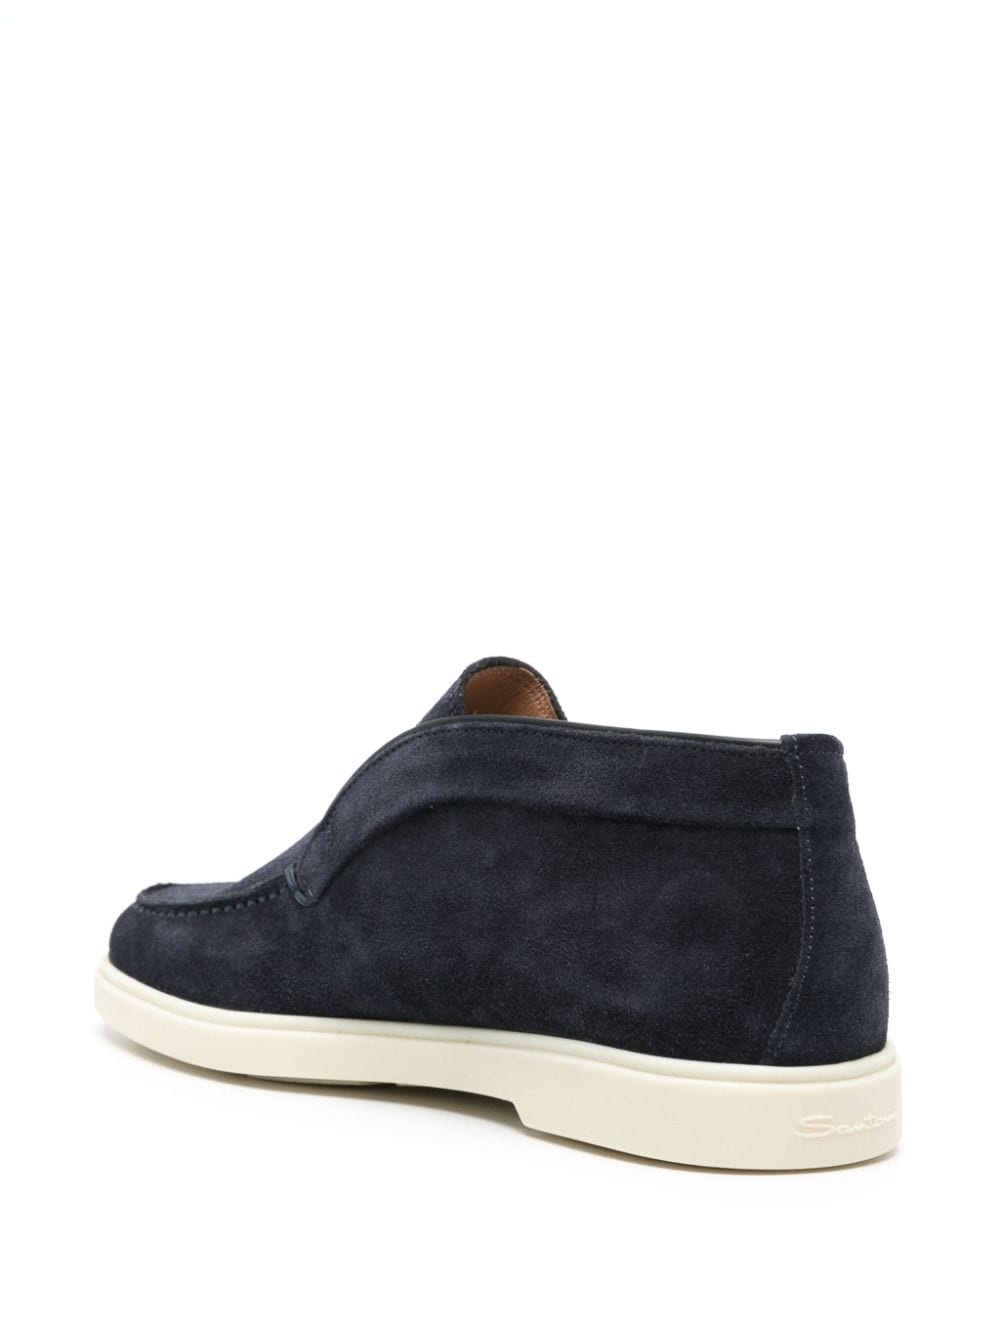 suede flat loafers - 3